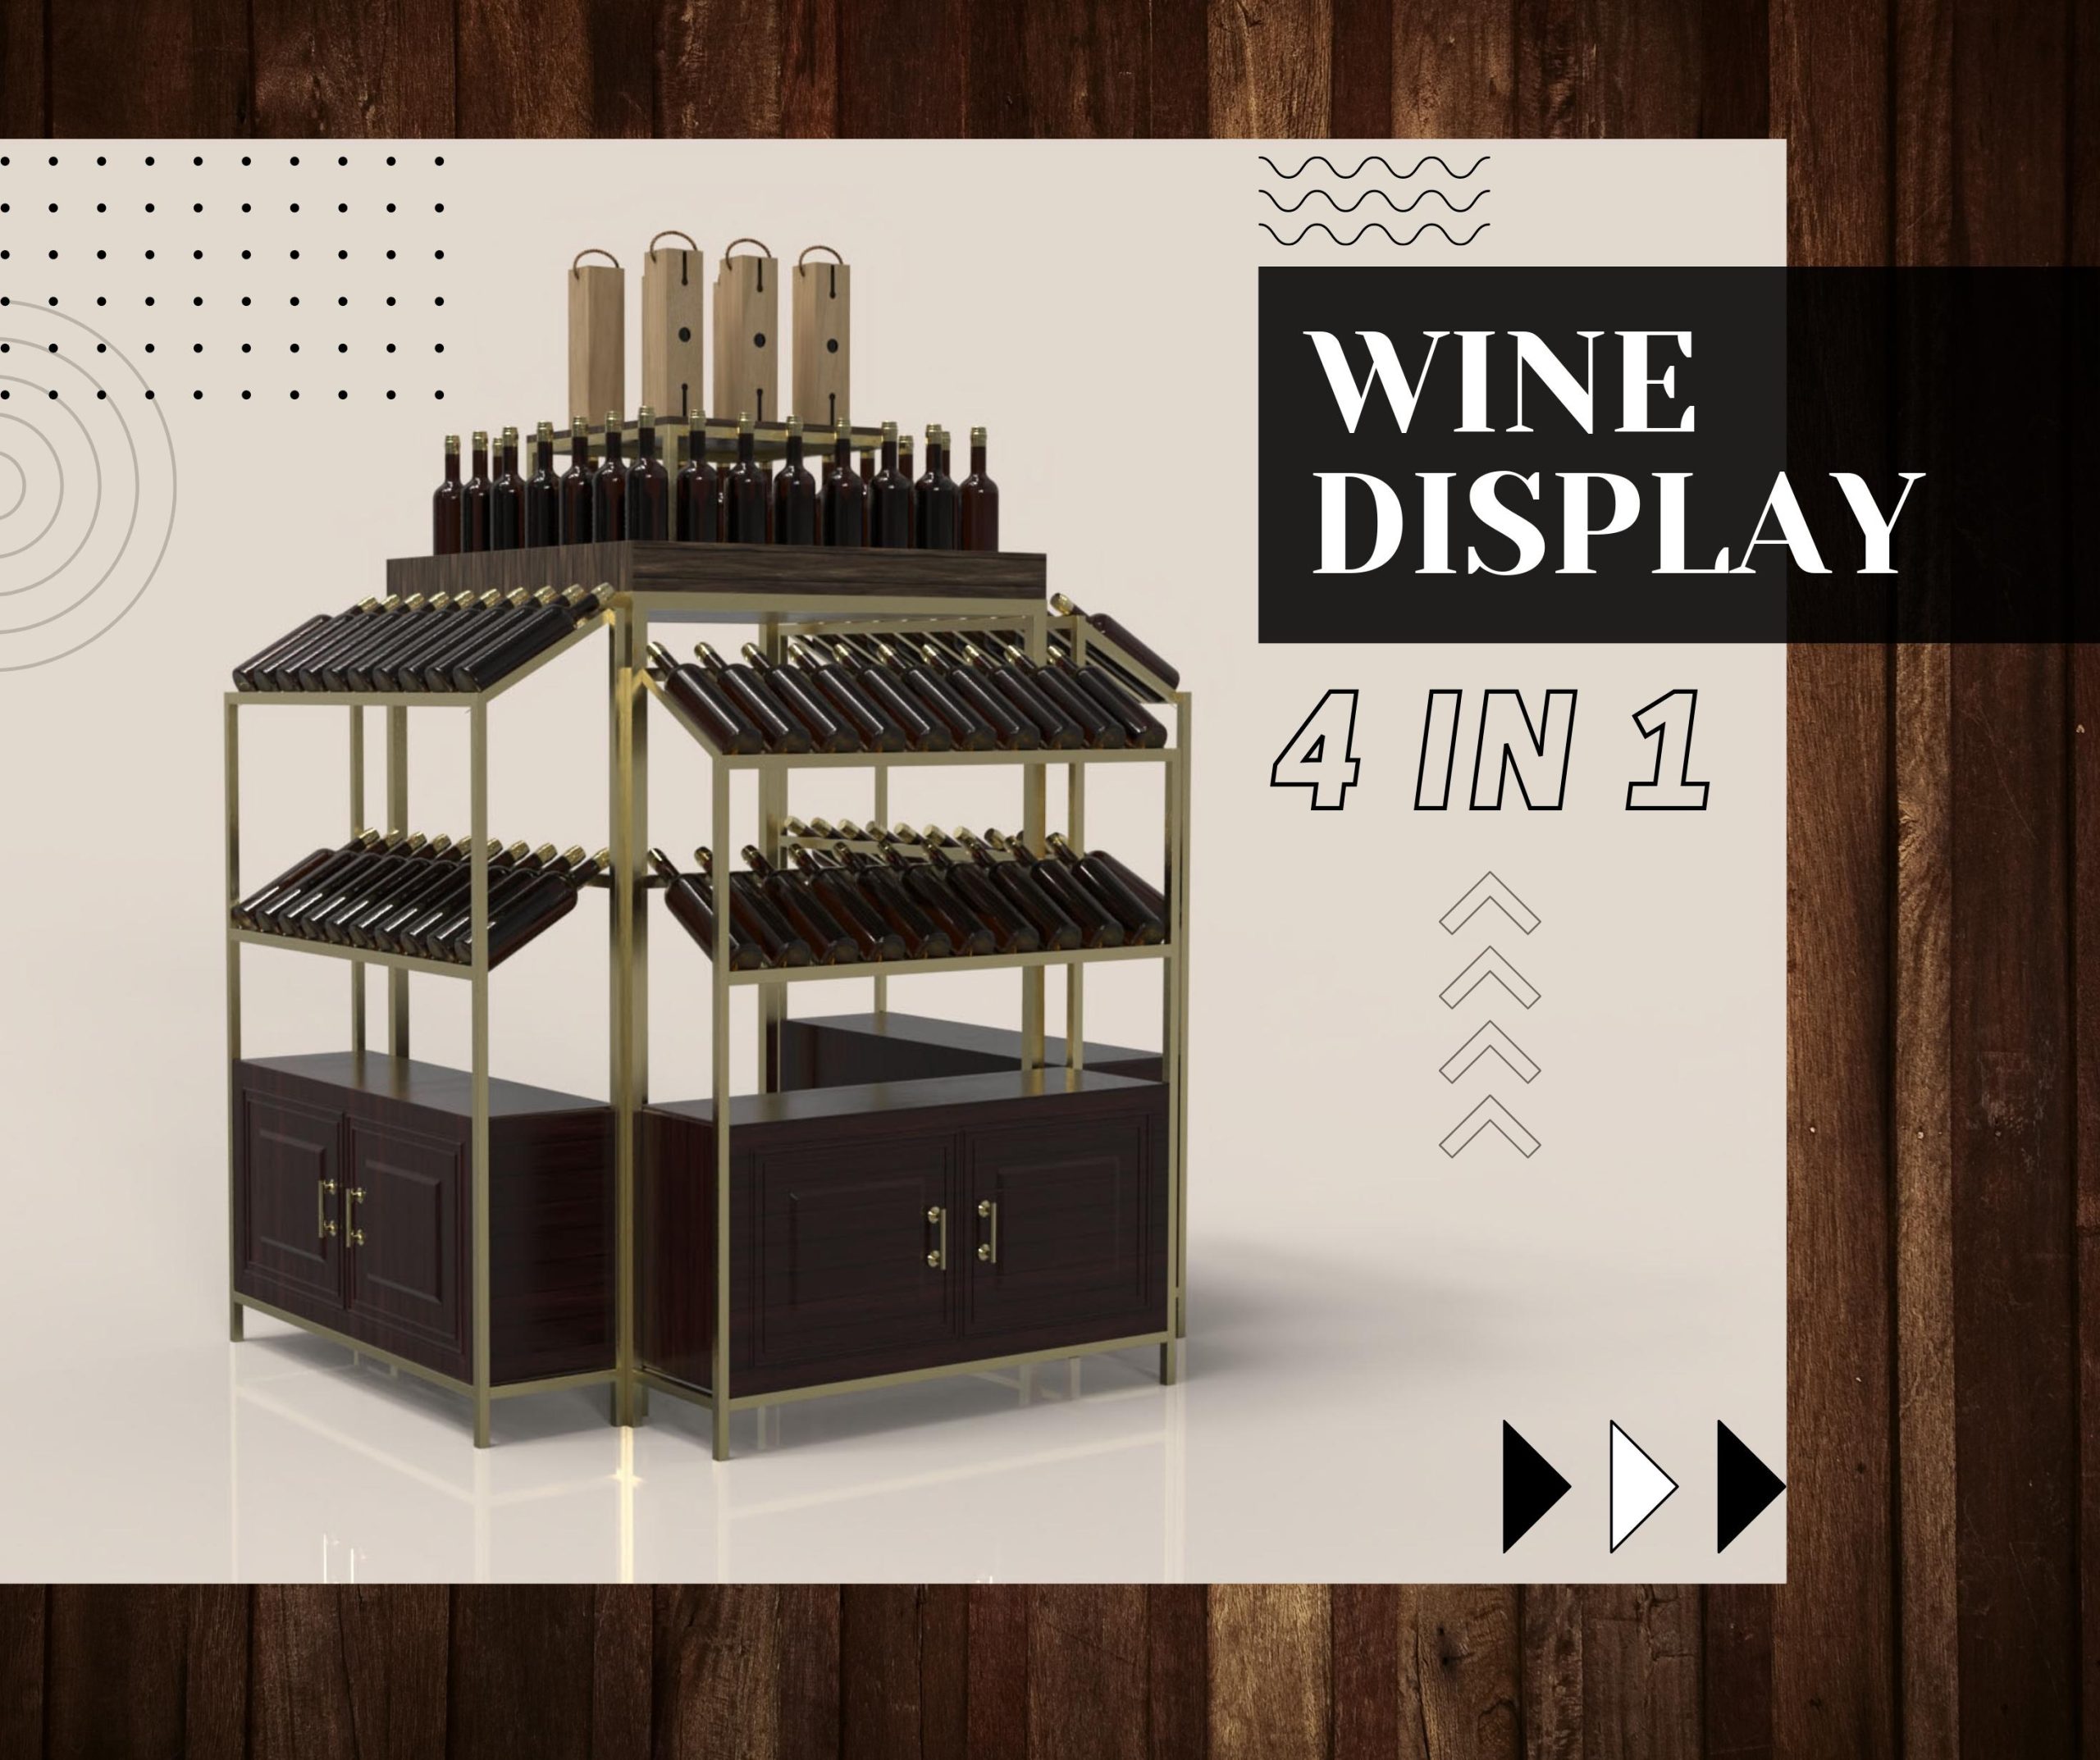 Multi-tiered wine display stand.